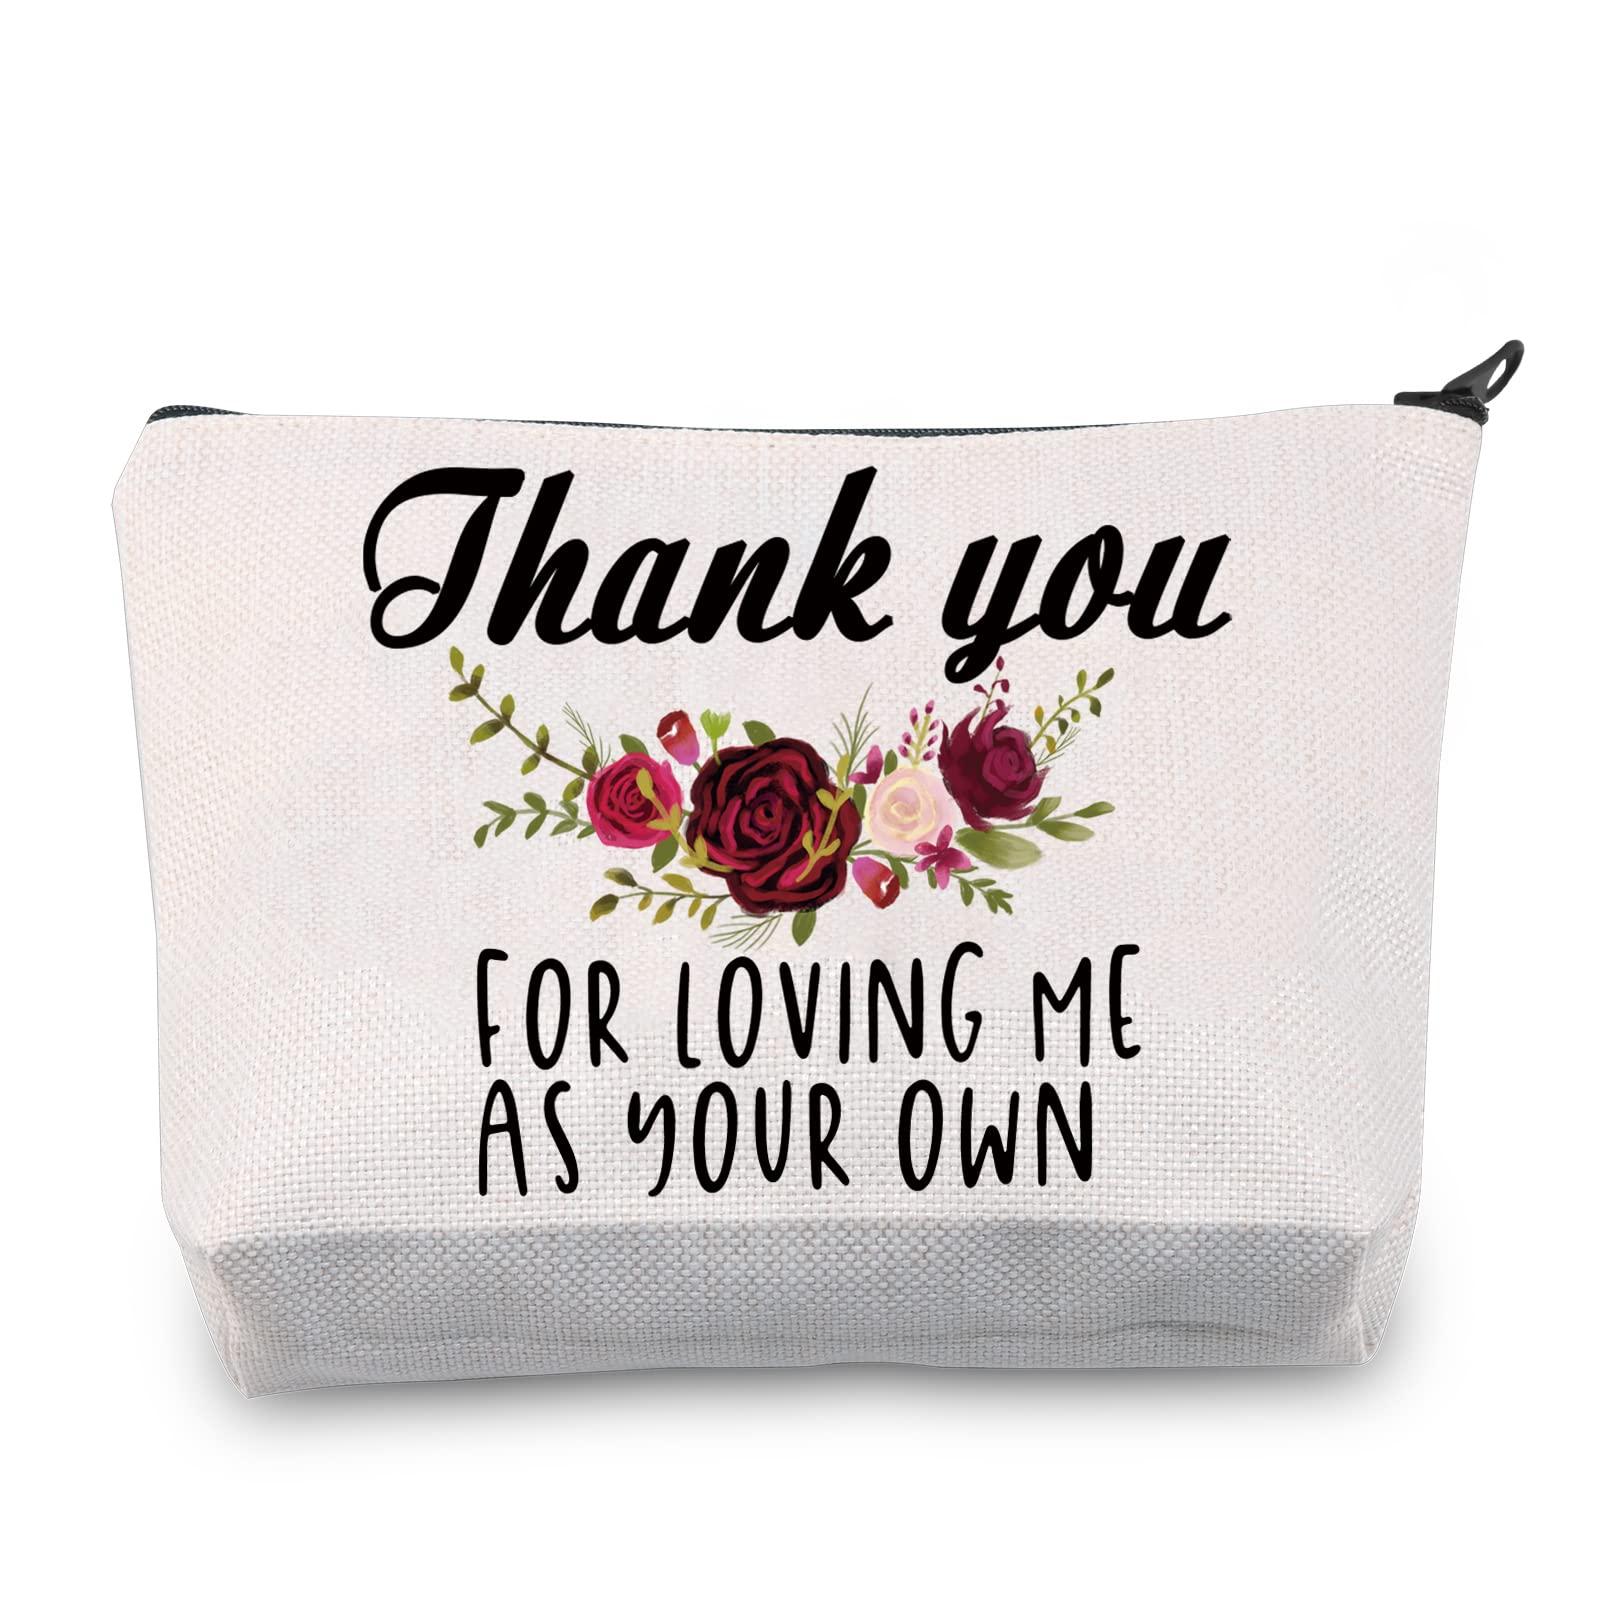 LEVLO Stepmom Gifts Thank You For Loving Me As Your Own Makeup Bags for Mother in law Mother’s day Birthday Gift, Loving Me As Your Own